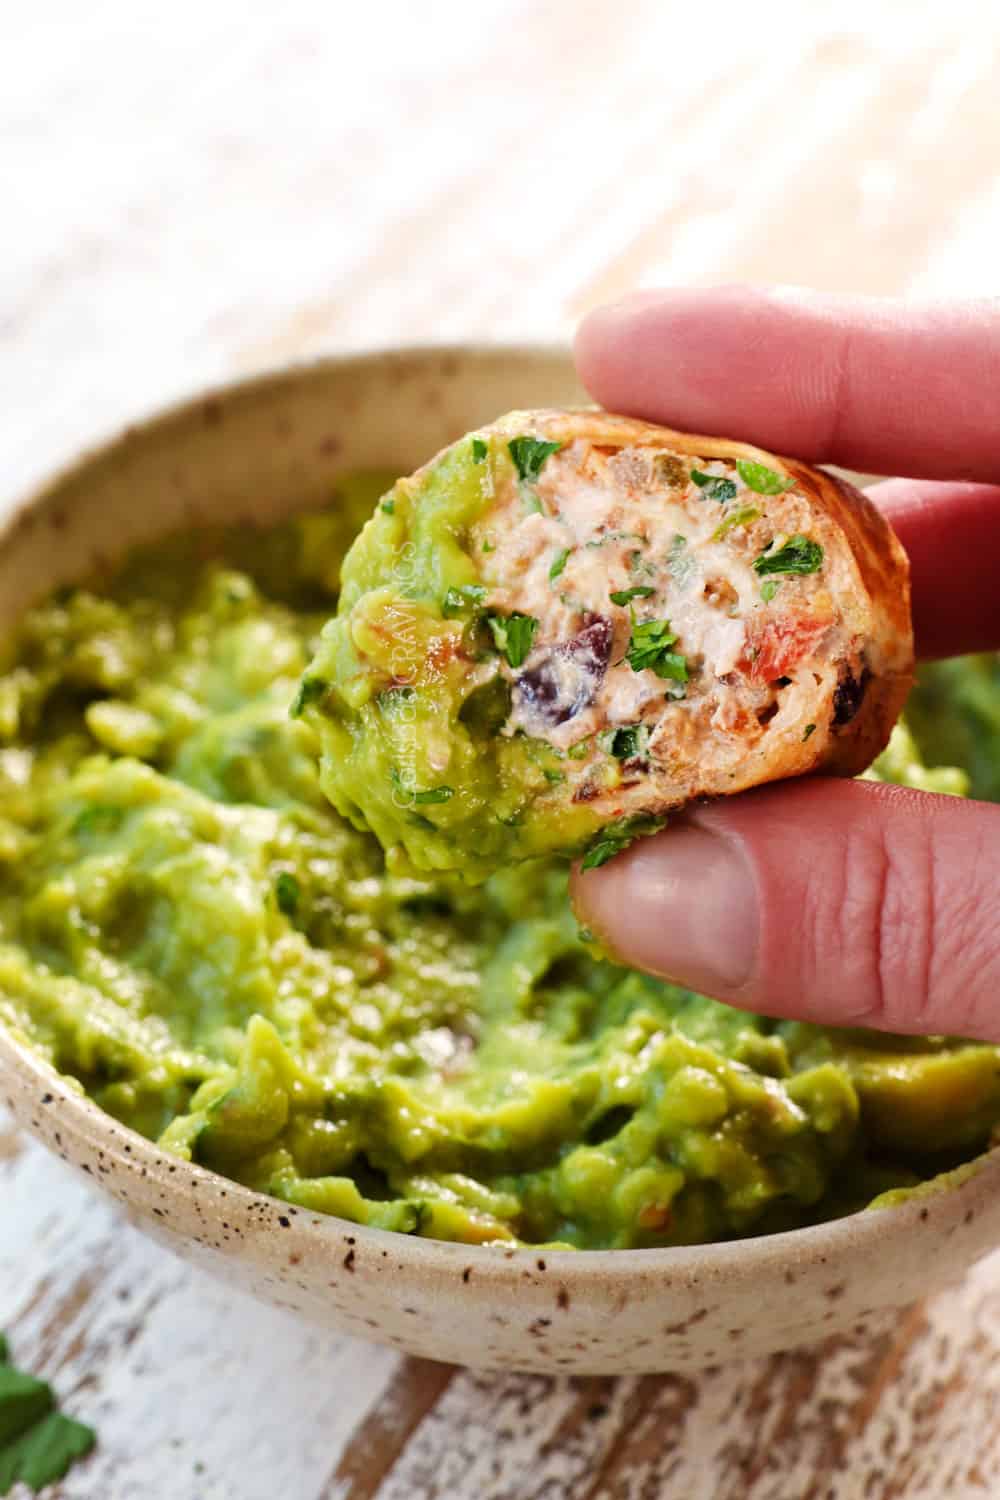 showing how to serve Mexican pinwheel recipe by dipping into guacamole